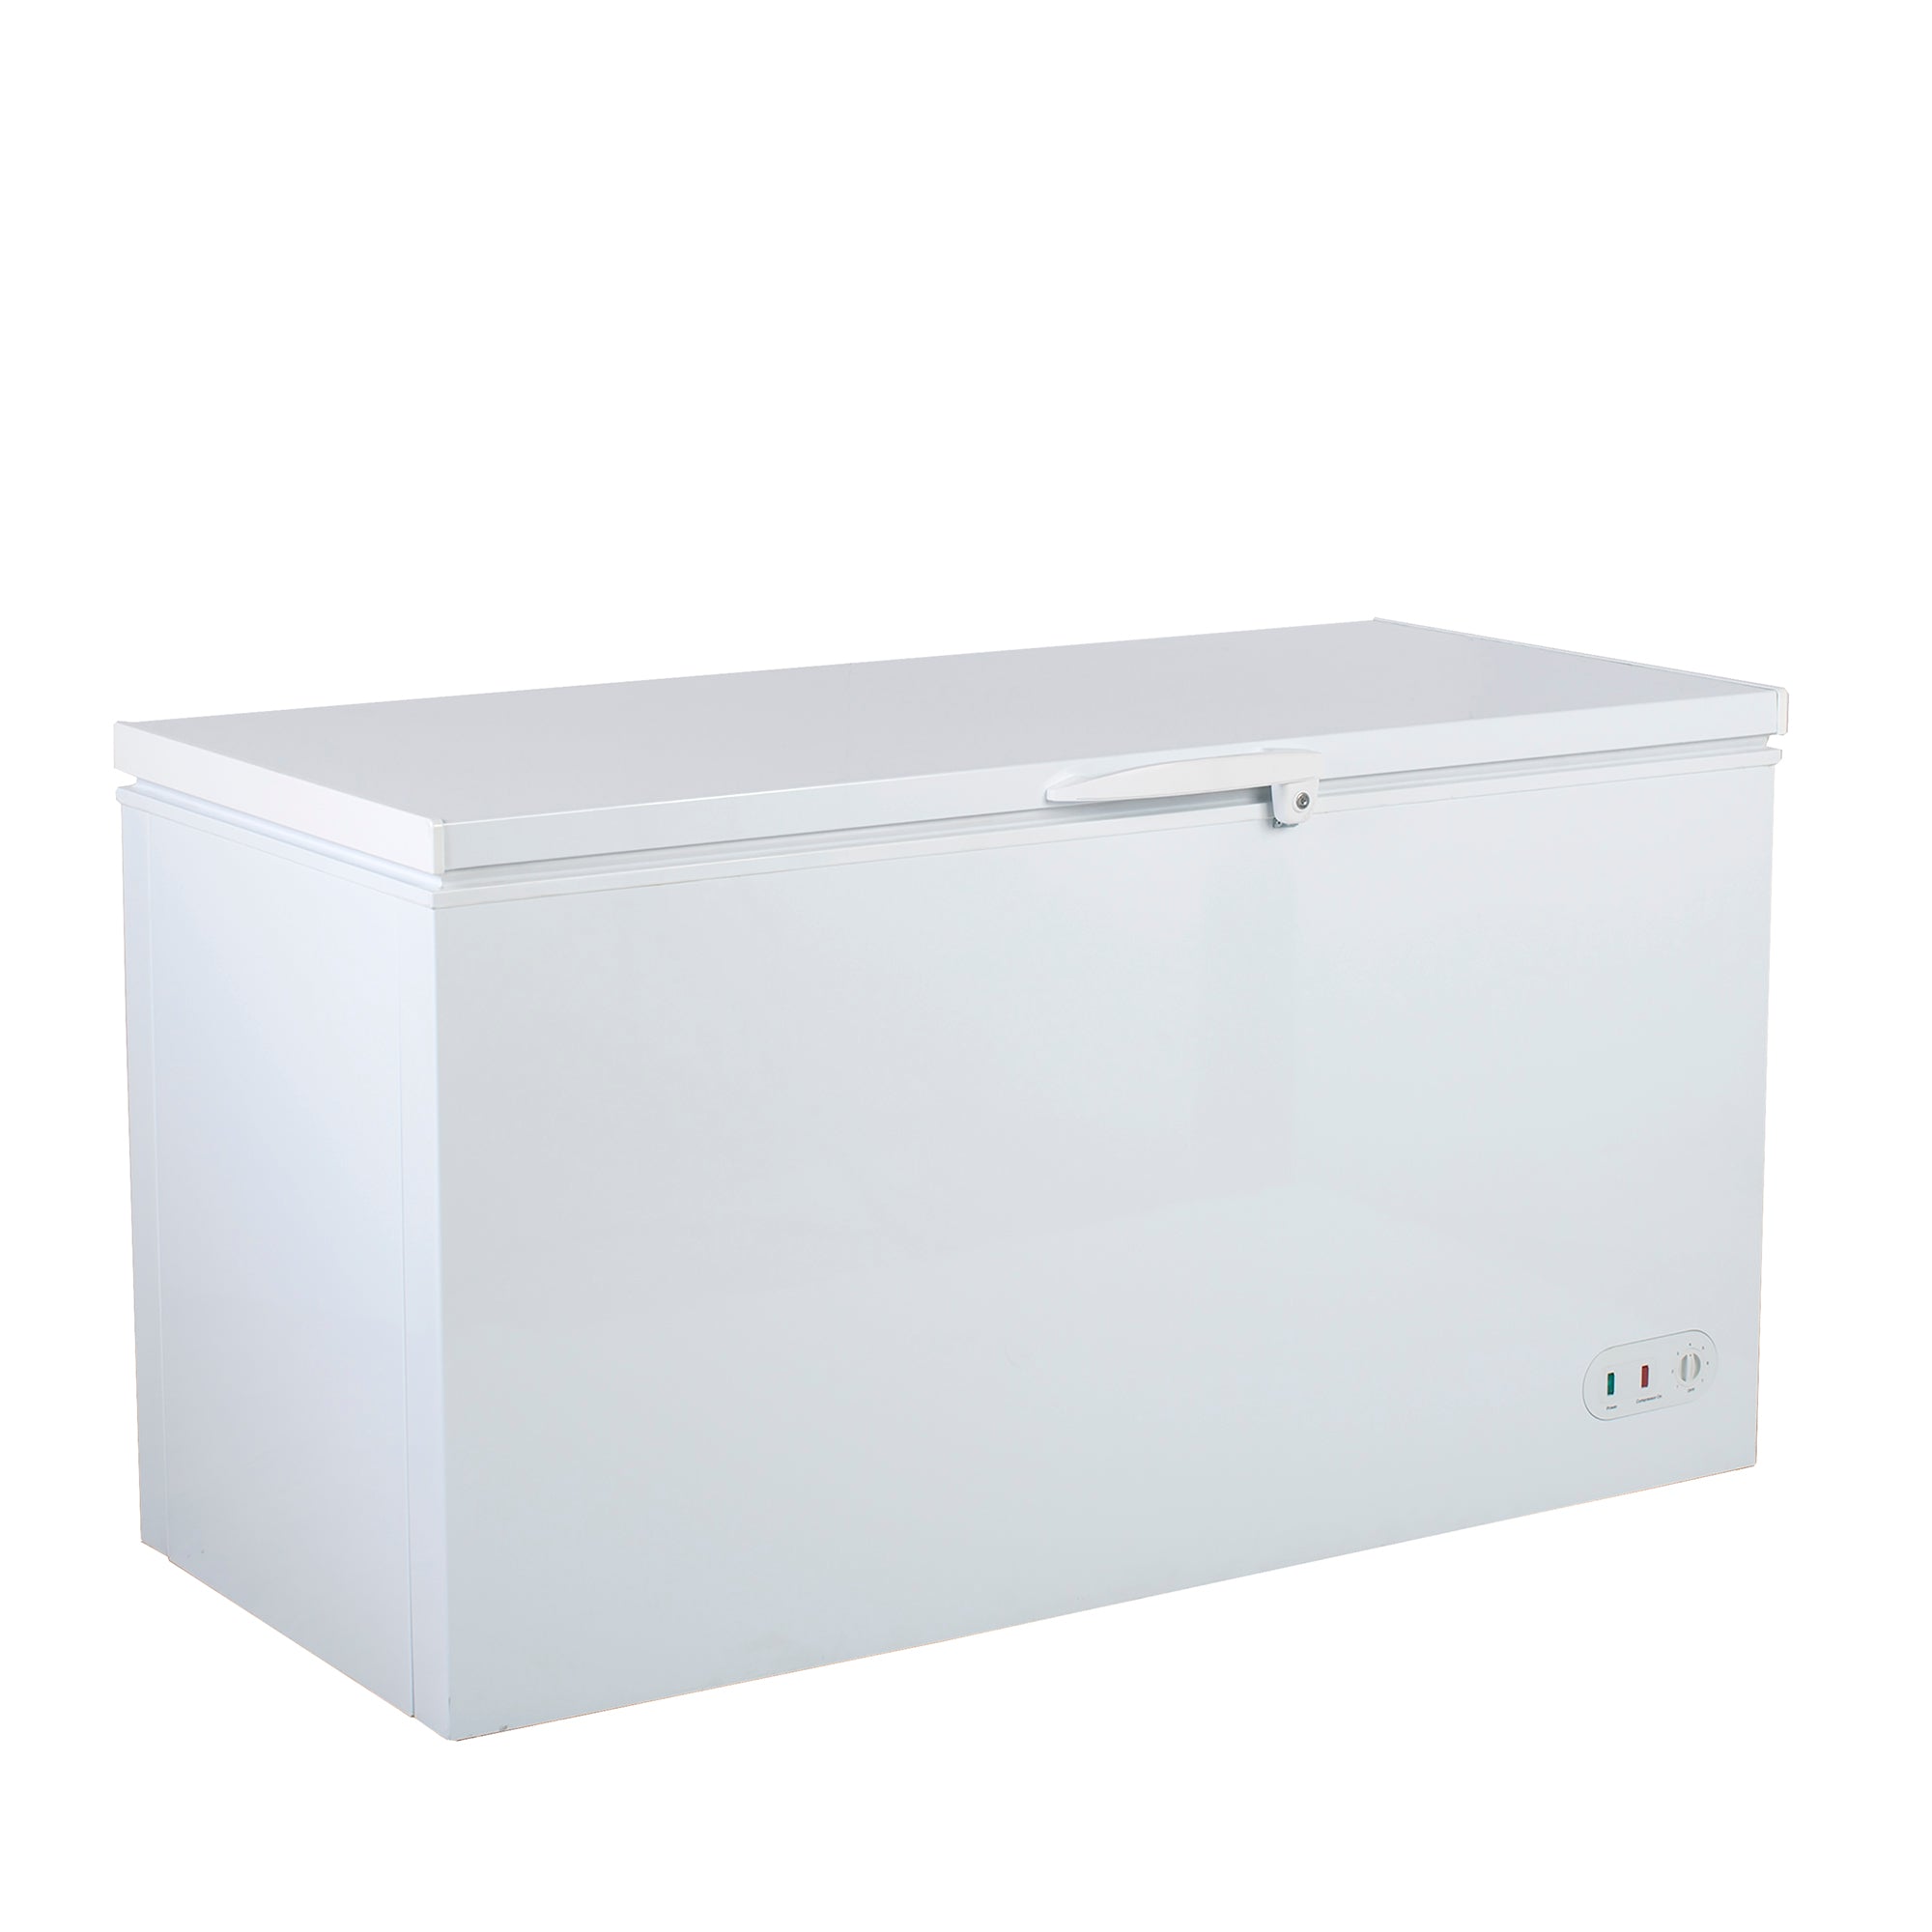 Maxx Cold - MXSH15.9SHC, Maxx Cold Chest Freezer with Solid Top, 60.2"W, 15.9 cu. ft. Storage Capacity, Locking Lid, Garage Ready, in White